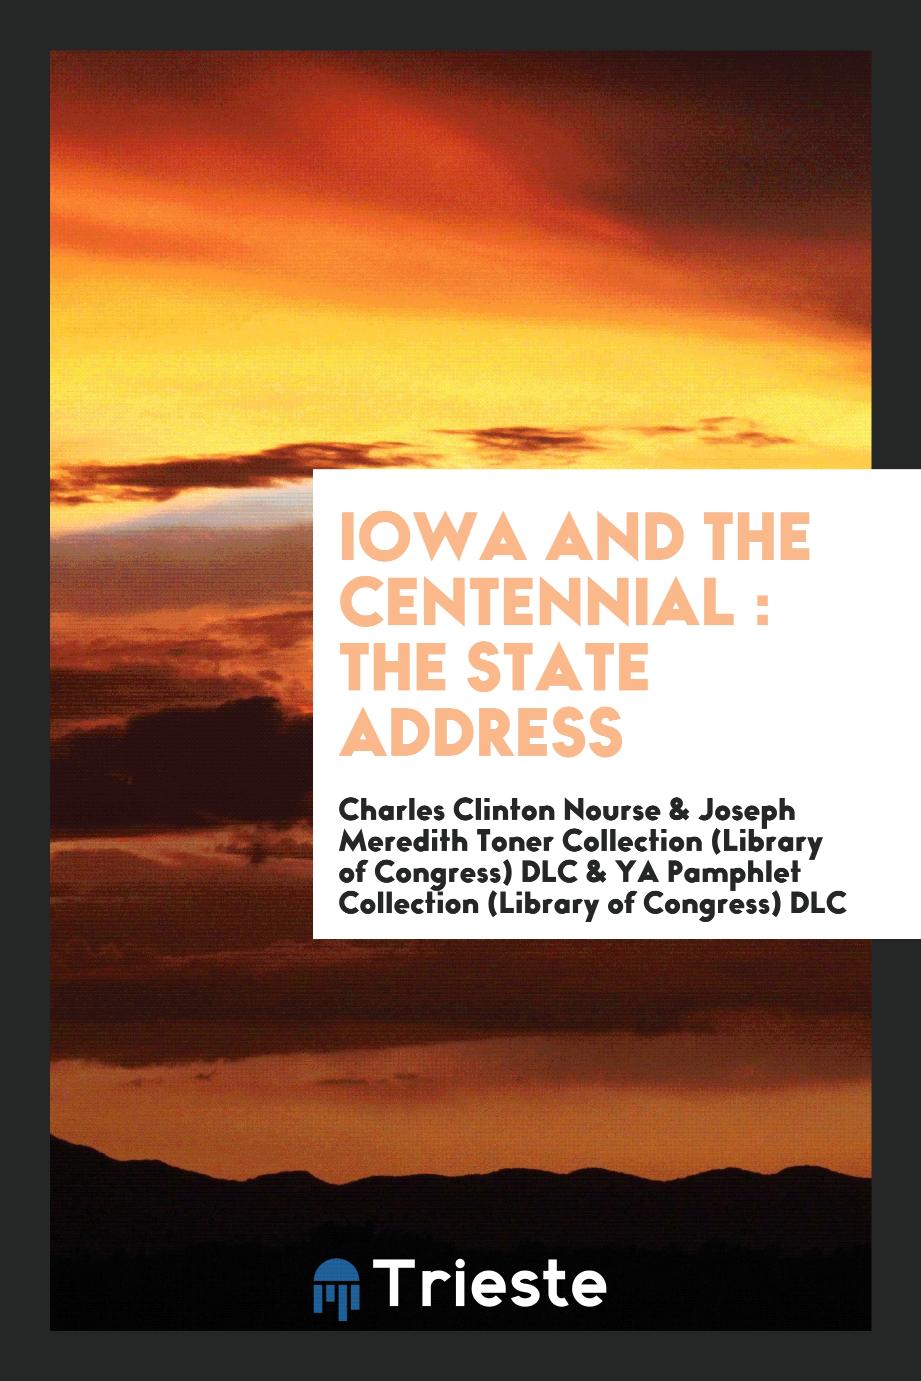 Iowa and the centennial : the state address